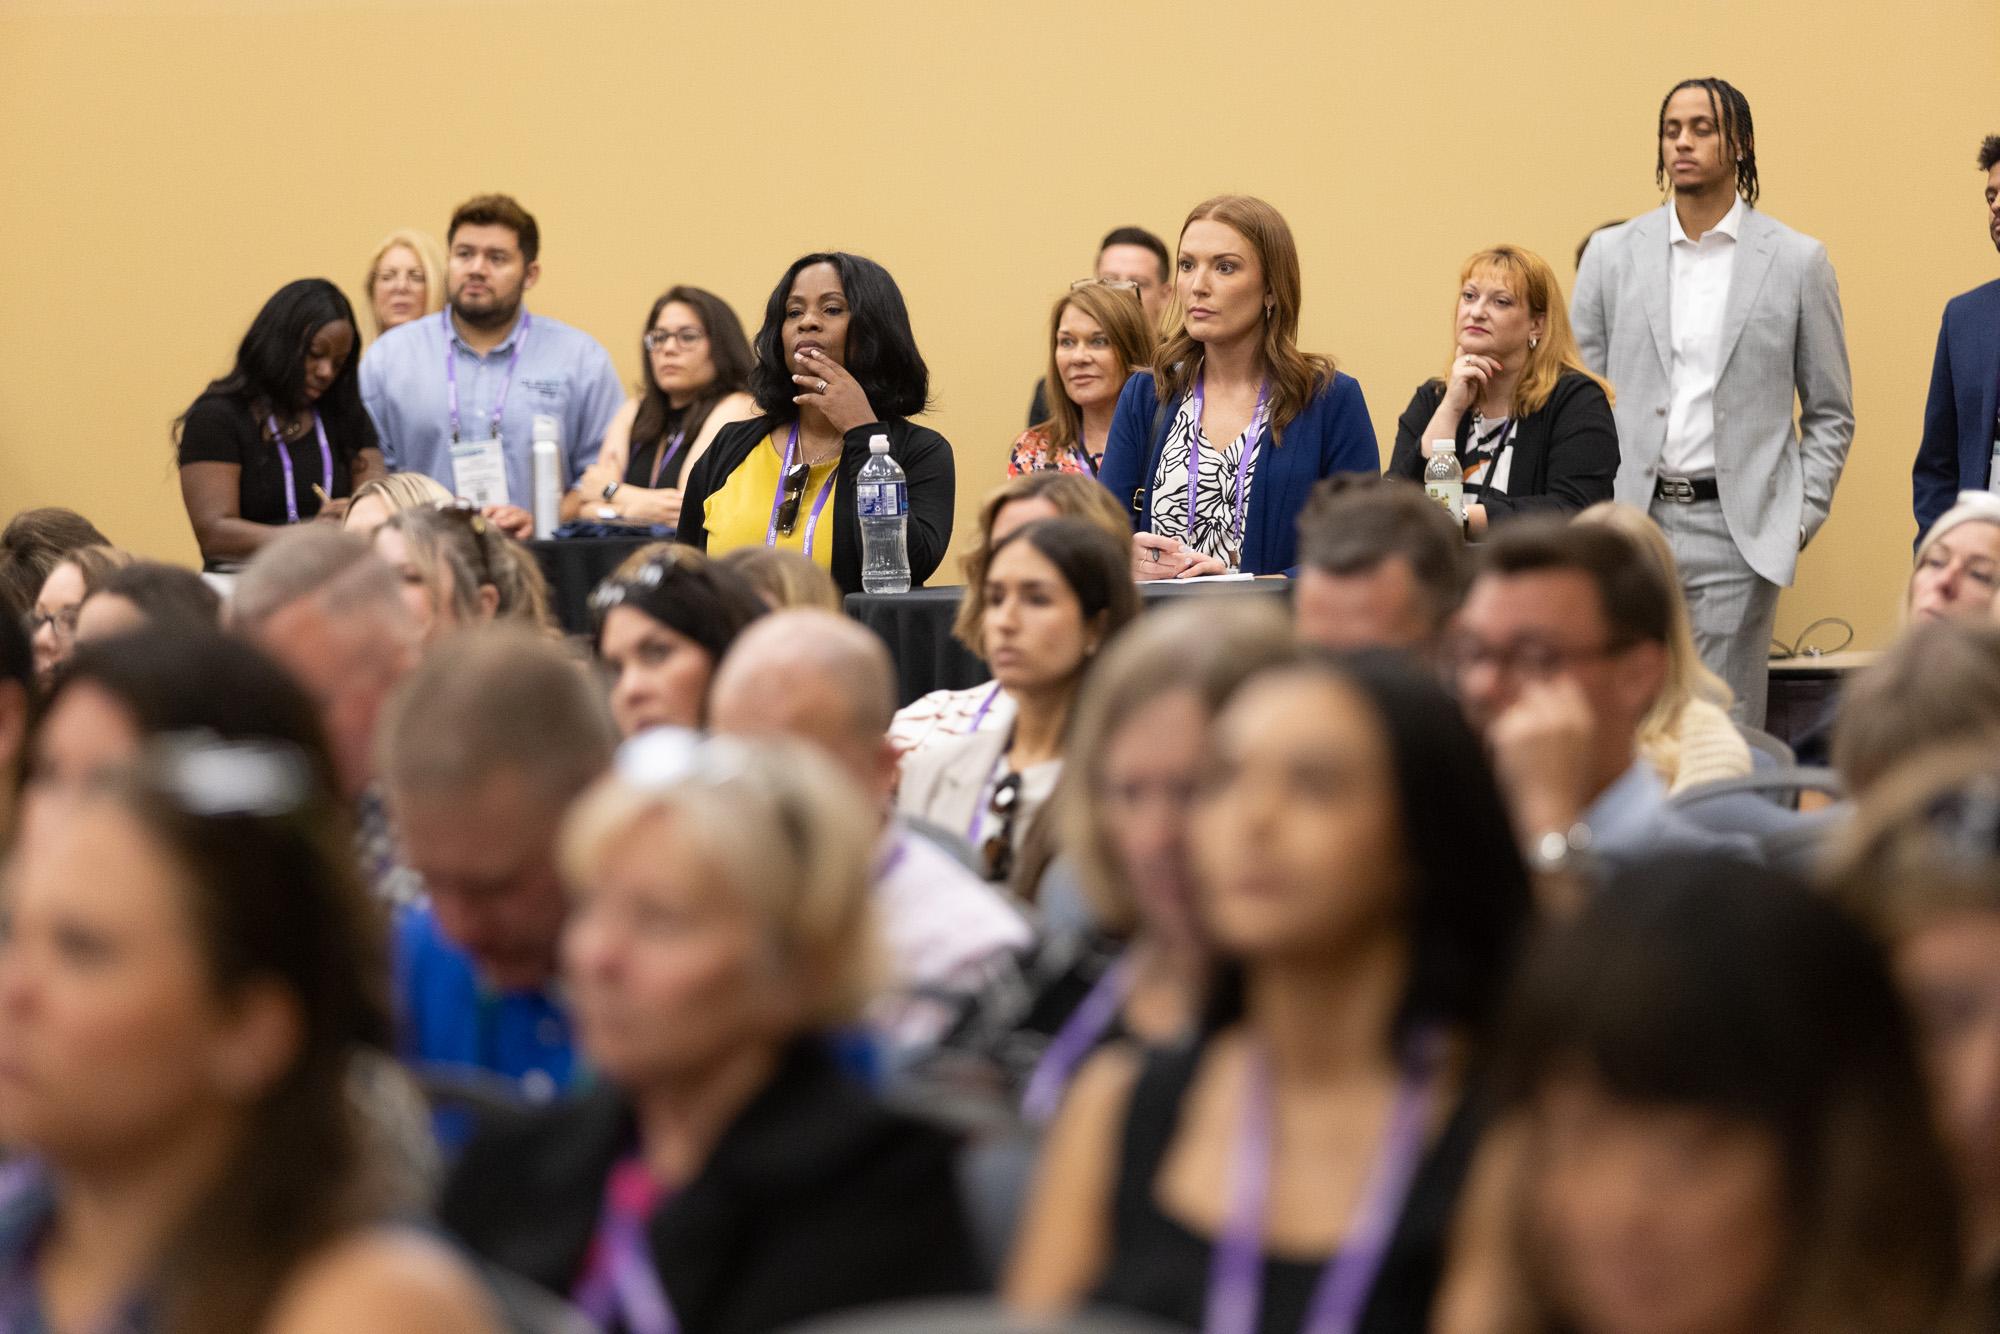 The education at Apartmentalize features over 100 sessions covering a variety of rental housing topics.